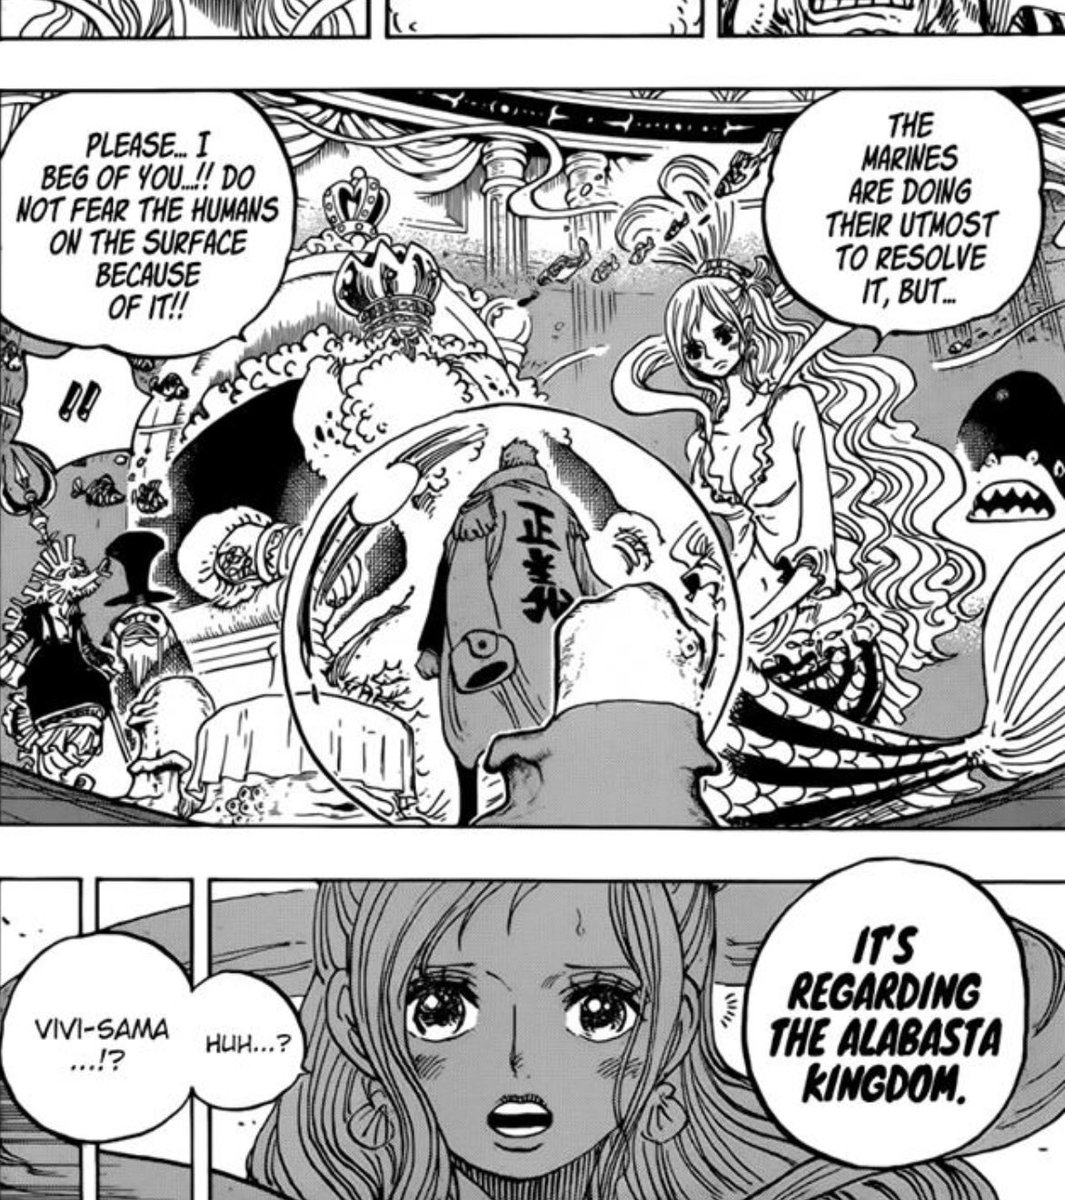 Niel Simon Ambagan The One Piece World Is Shaking Mysteries In 956 Tsk Just Too Much To Handle Deym Shits Bout To Happen Real Soon Yoh Marineford War